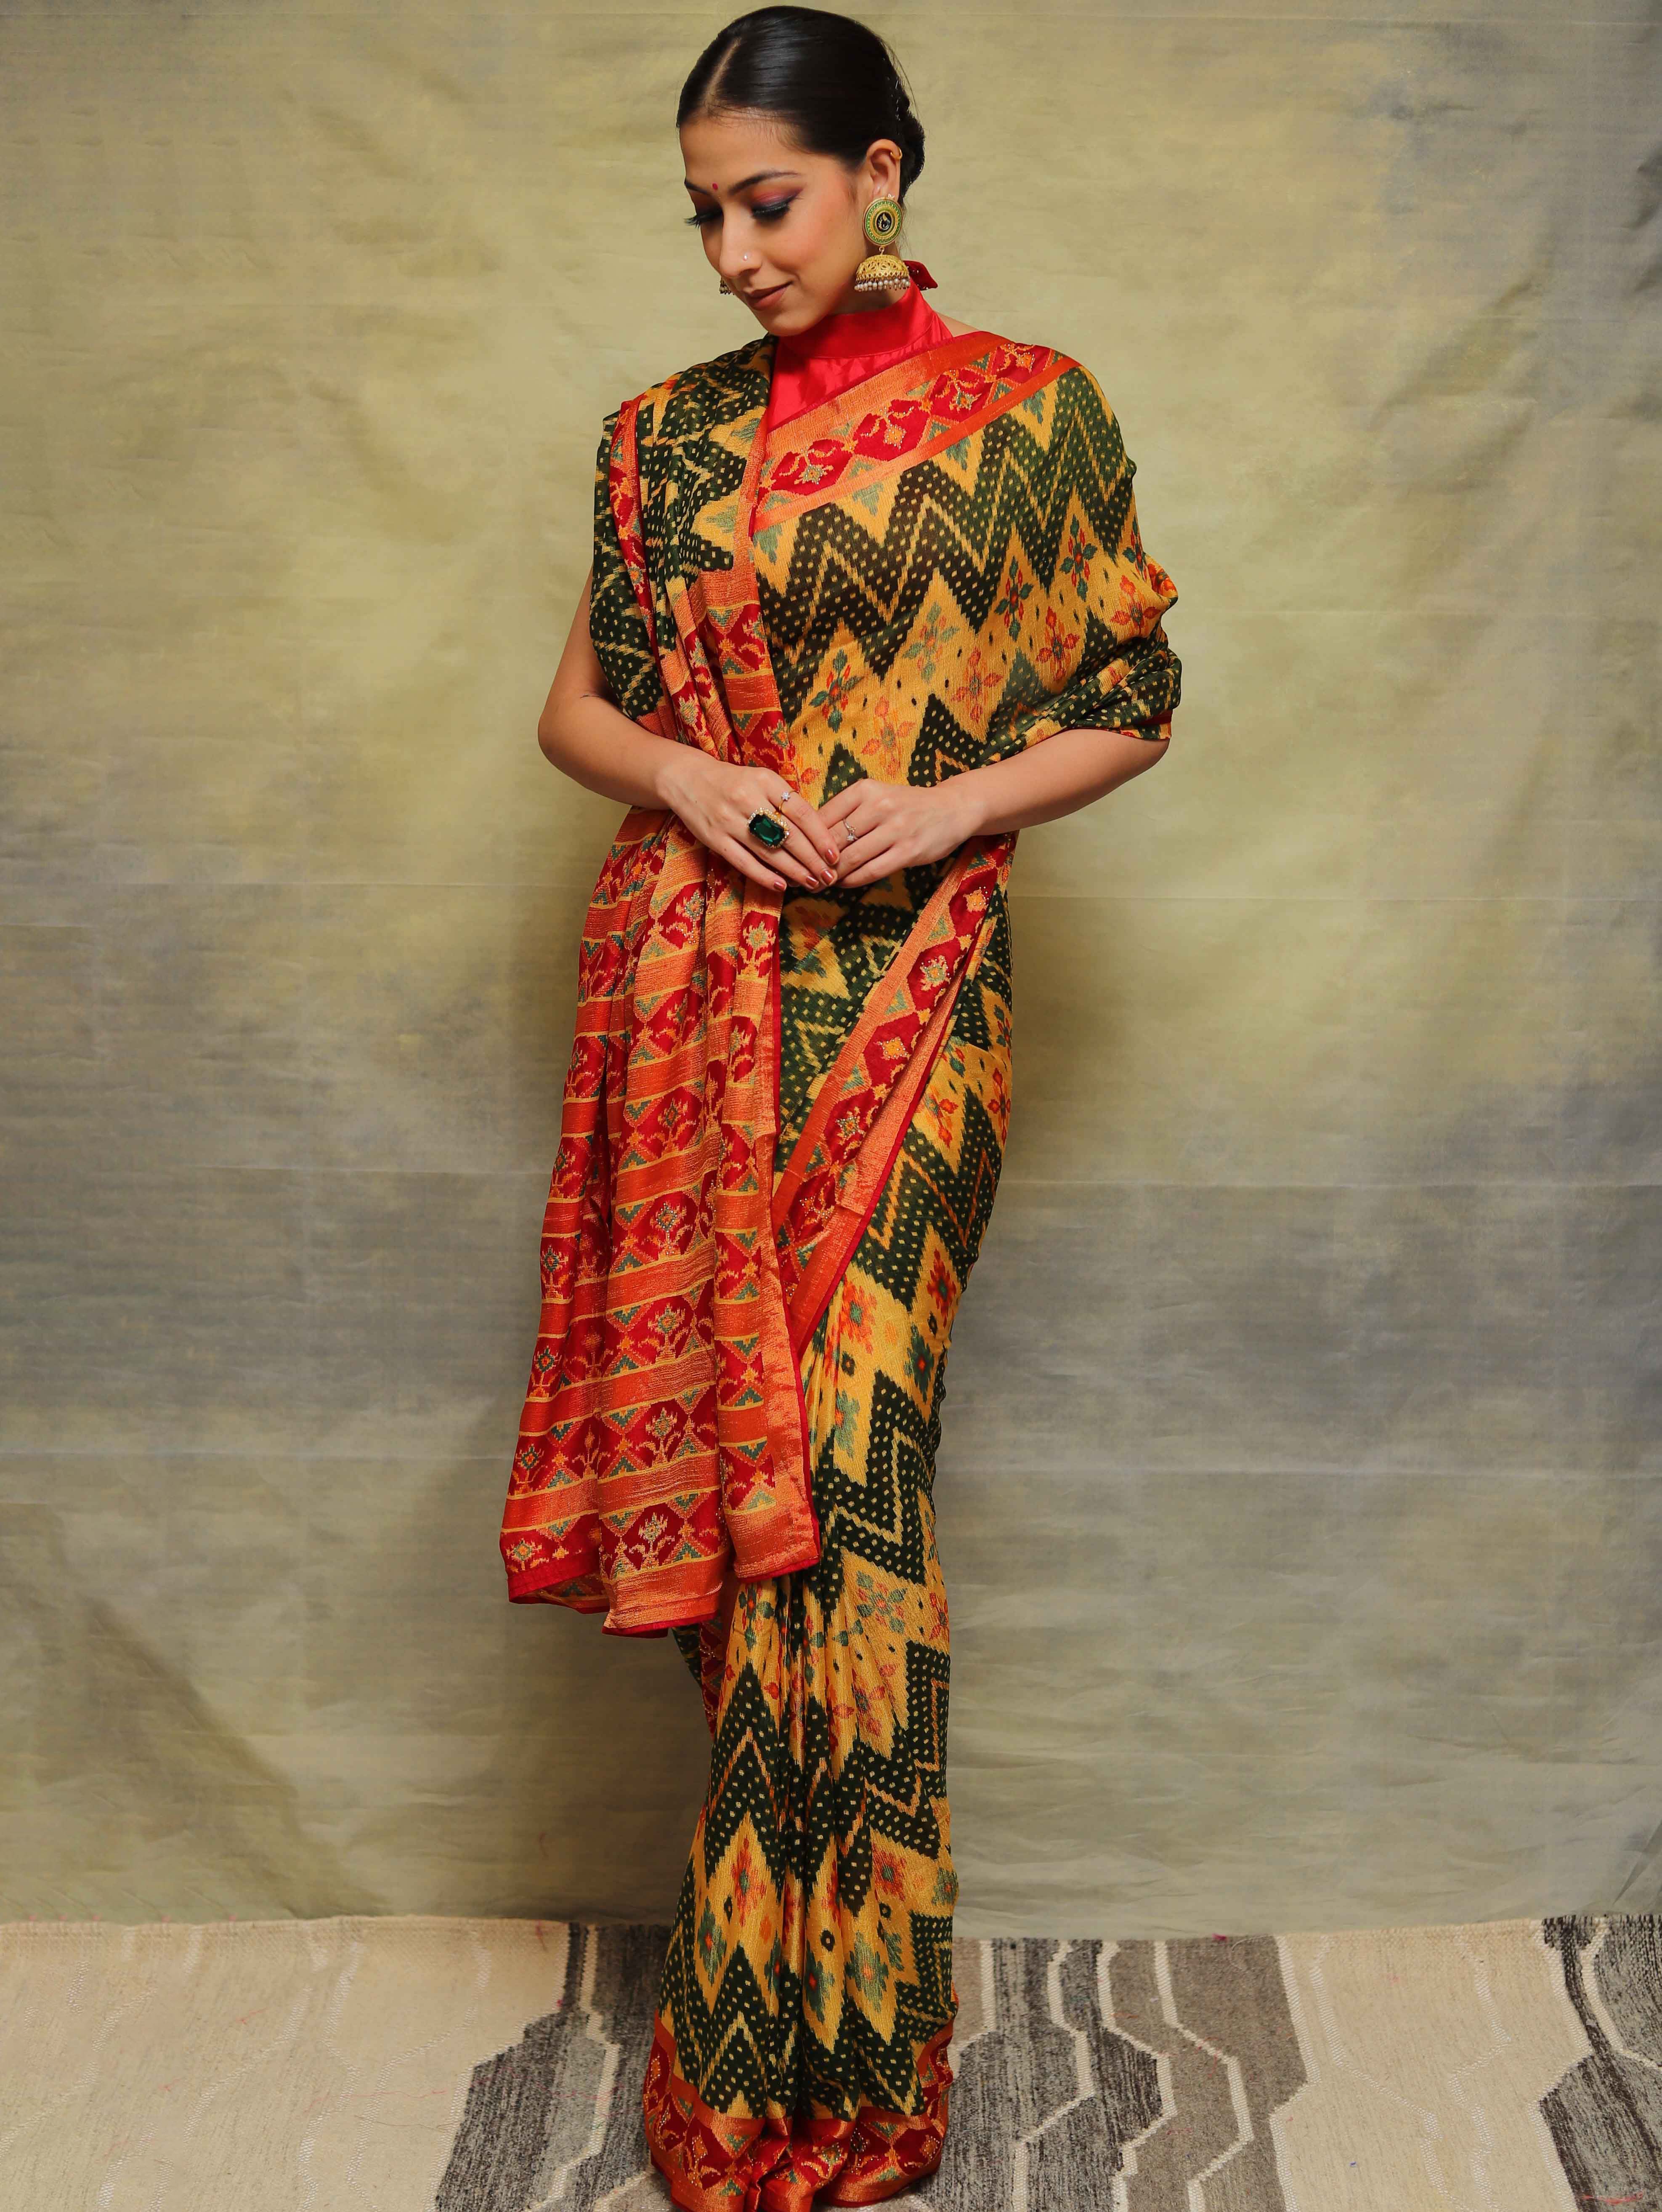 Banarasee Brasso Silk Jaal Saree With Contrast Embroidered Blouse-Yellow & Red